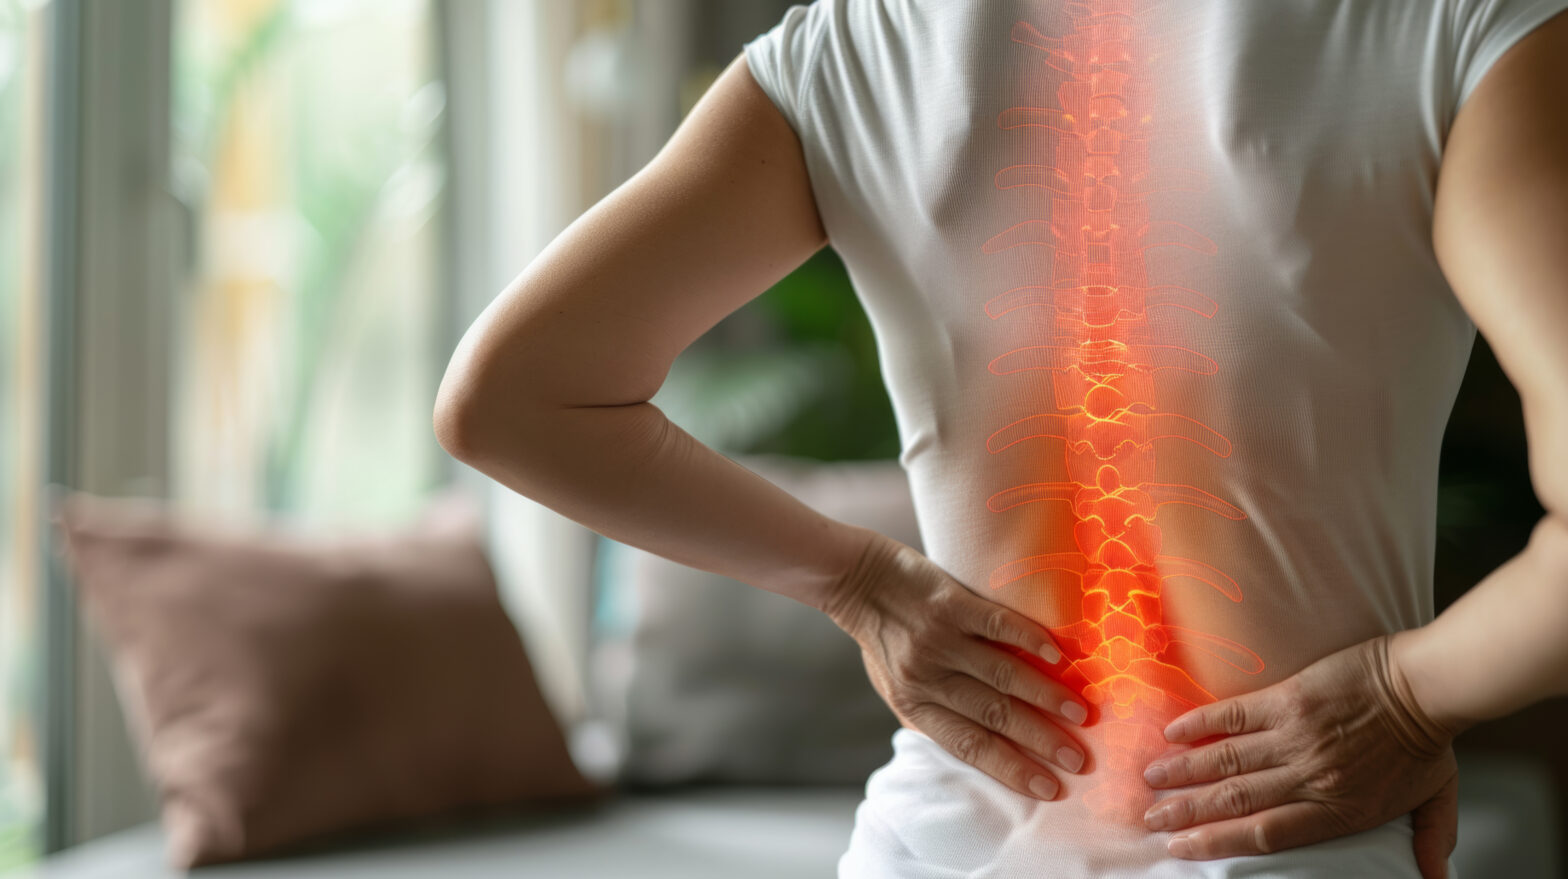 non-surgical physical therapy for back pain